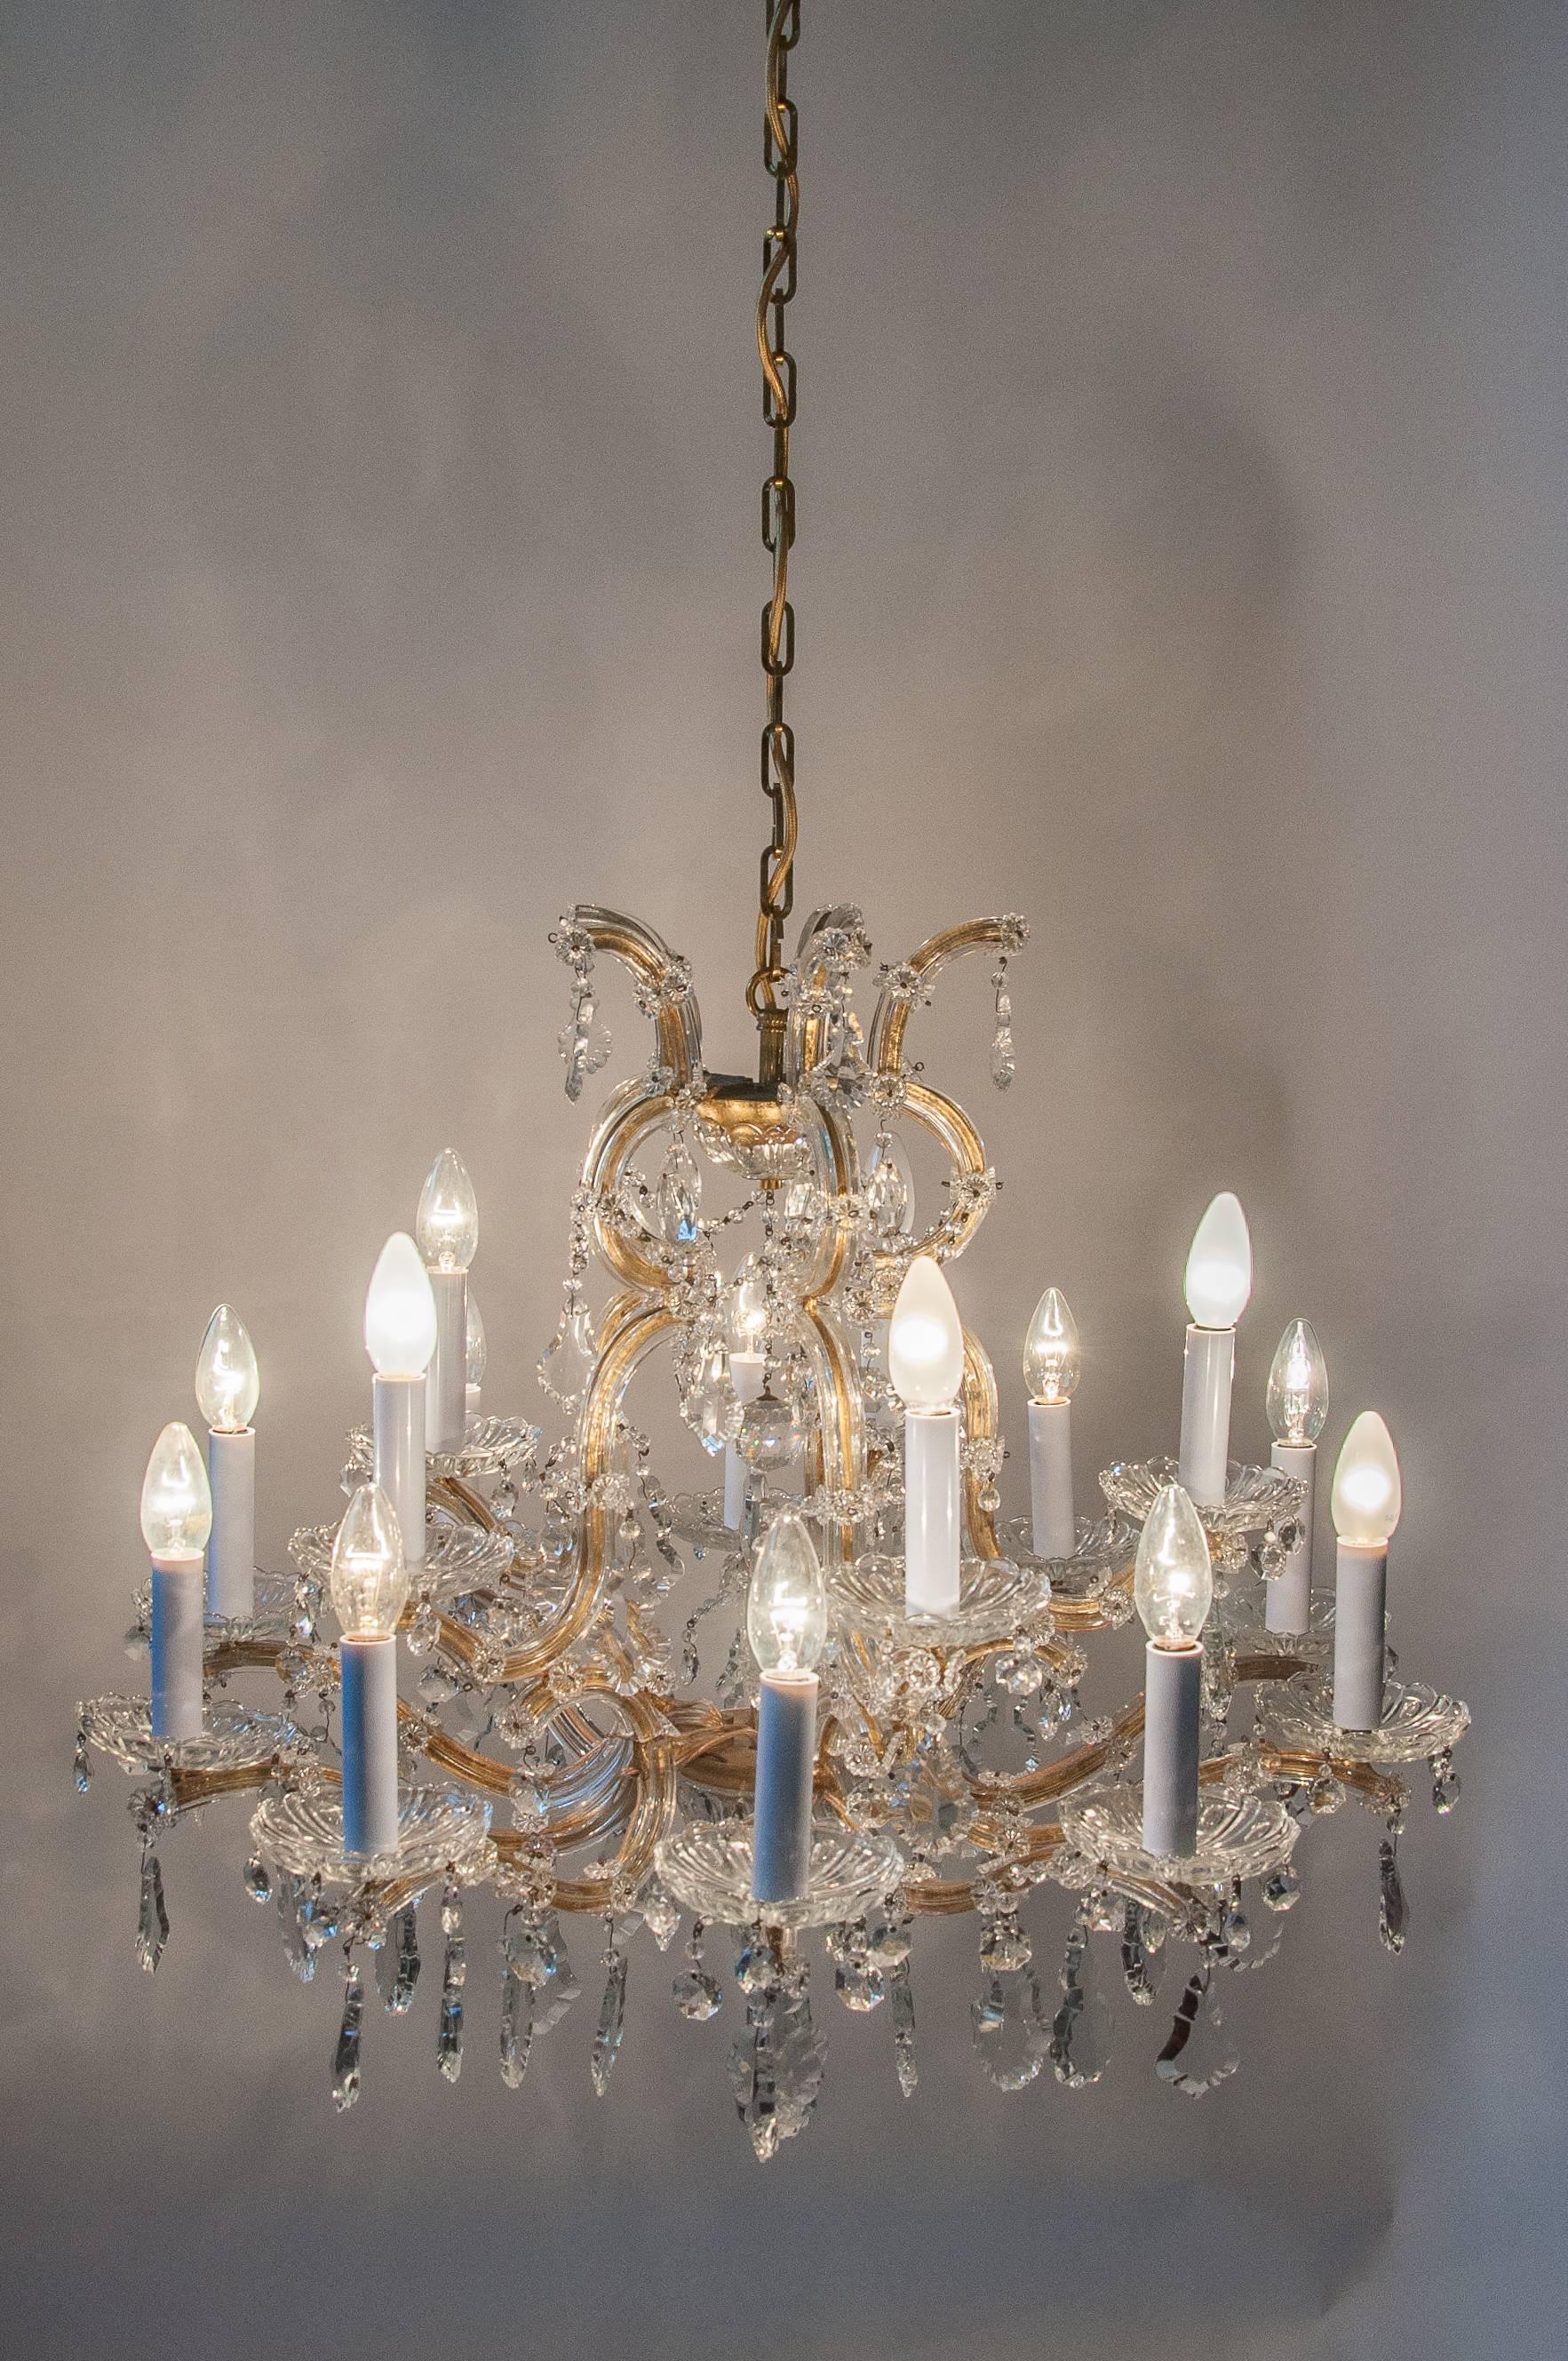 A very elegant and hard to find 15 socket crystal chandeliers with glaced sides from Vienna. 
The Chandelier is handmade of iron and set in gold color, handworked finish. The dressing of the chandelier is featuring a traditional assembly of crystals